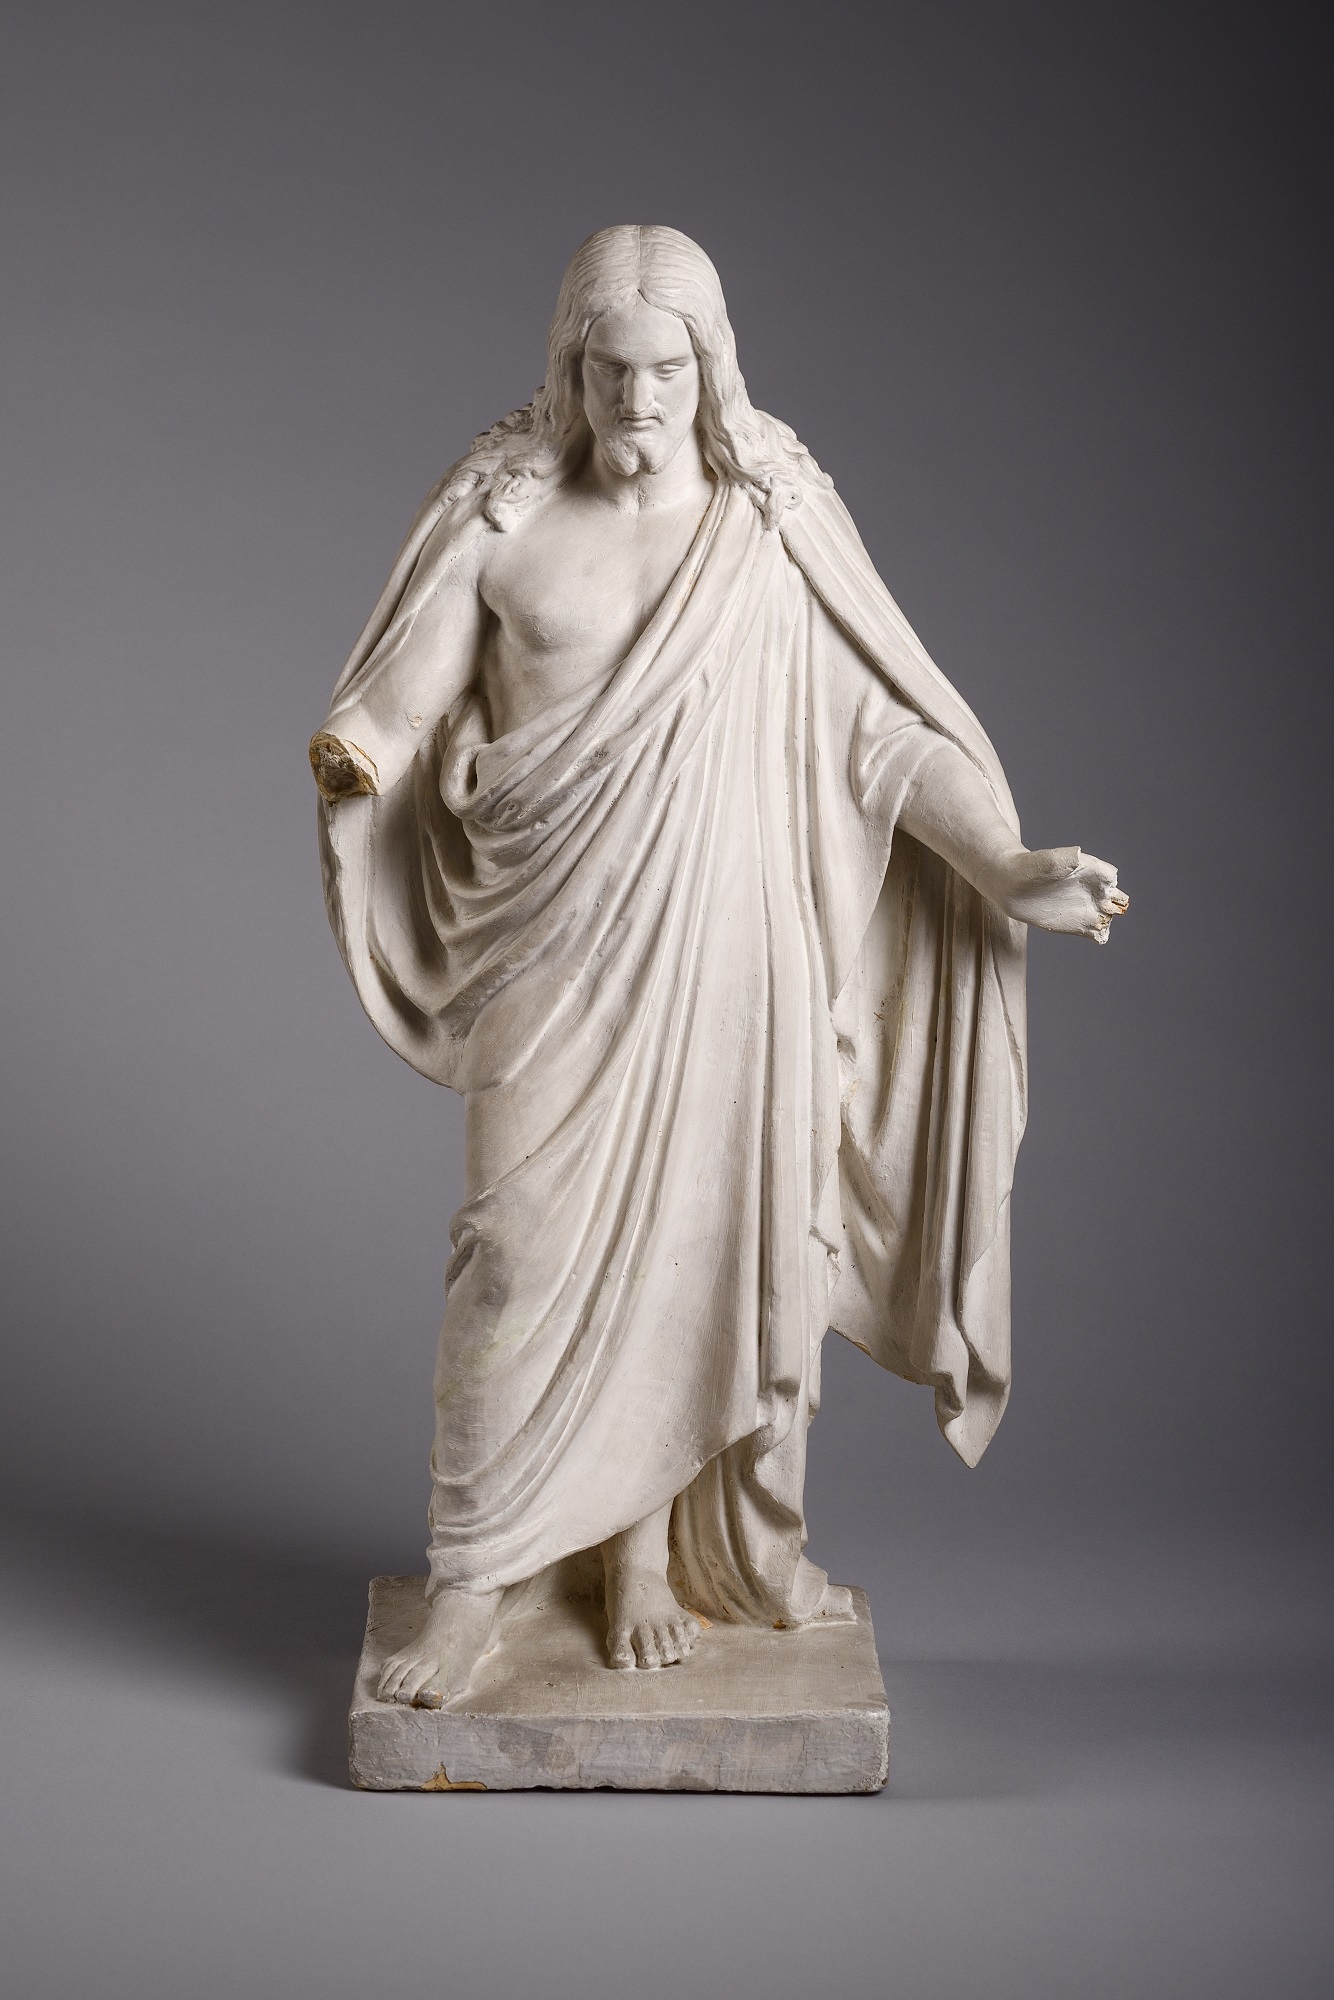 A small statue of a figure with long hair and arms slightly outstretched. The figure is wearing robes.